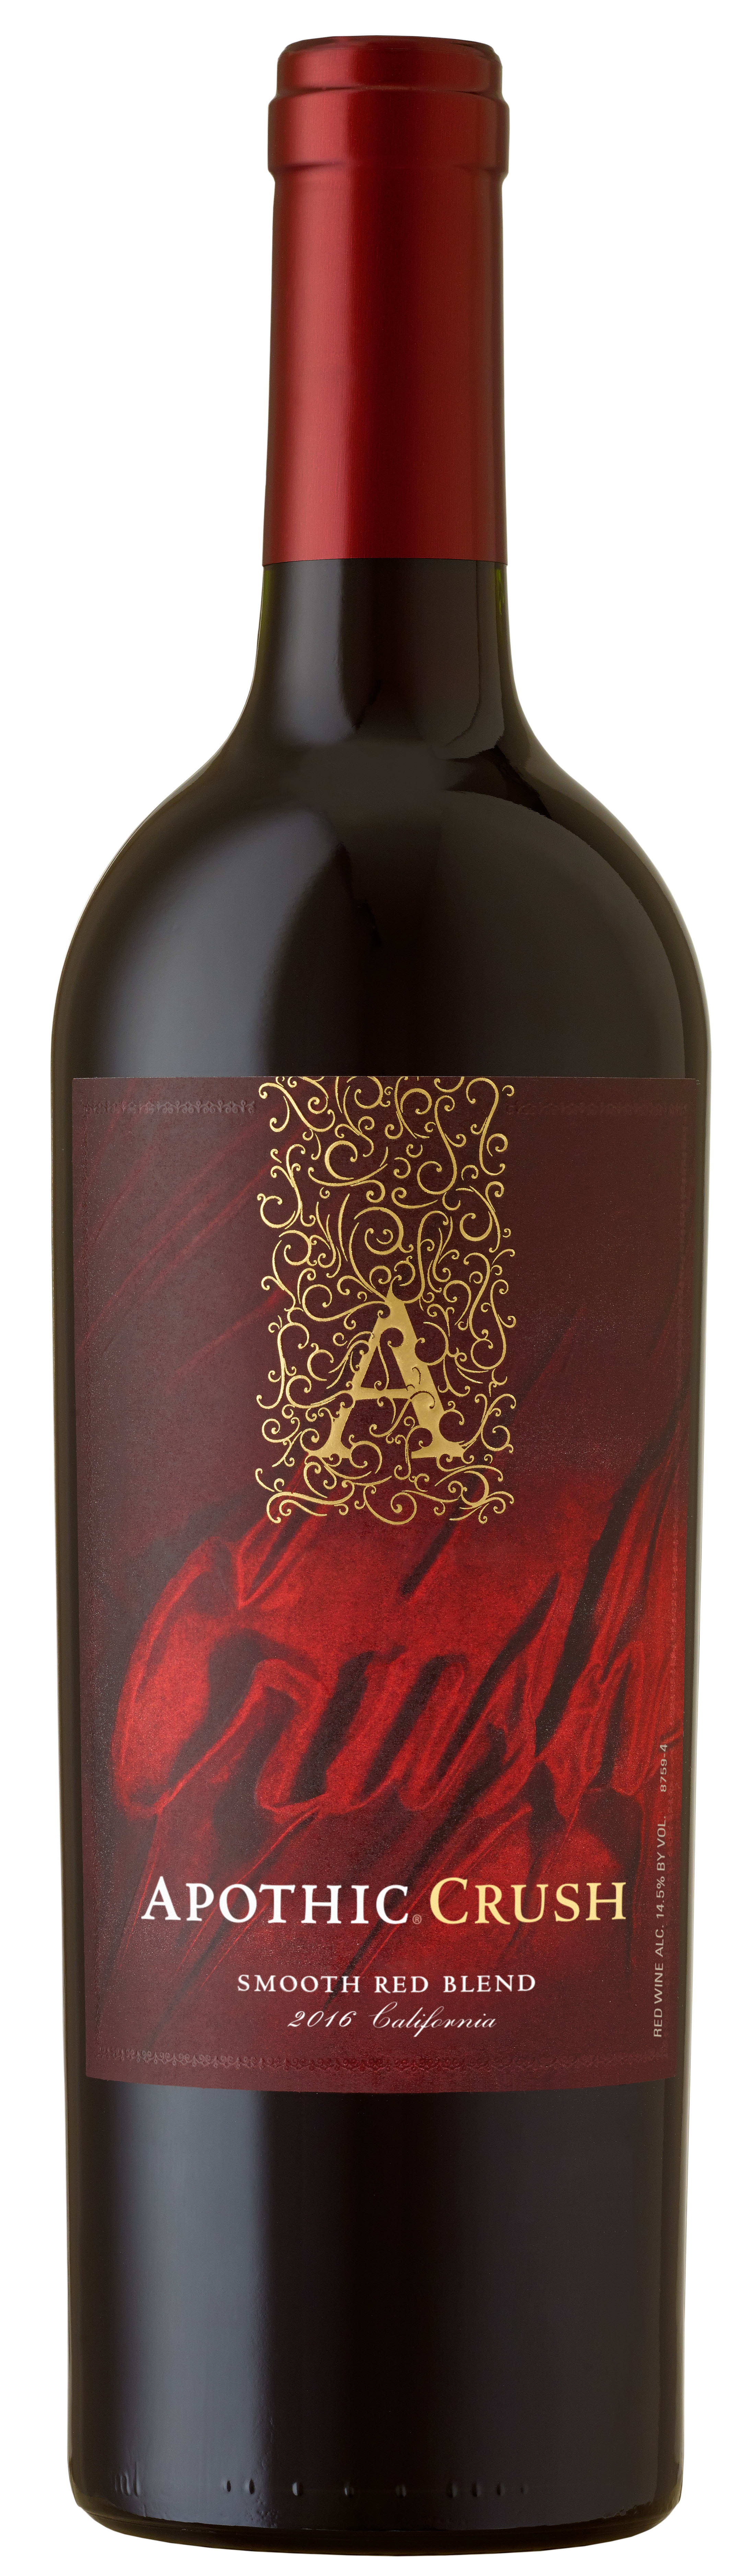 Apothic Rose Limited Release Wine, Sonoma County (Vintage Varies) - 750 ml bottle